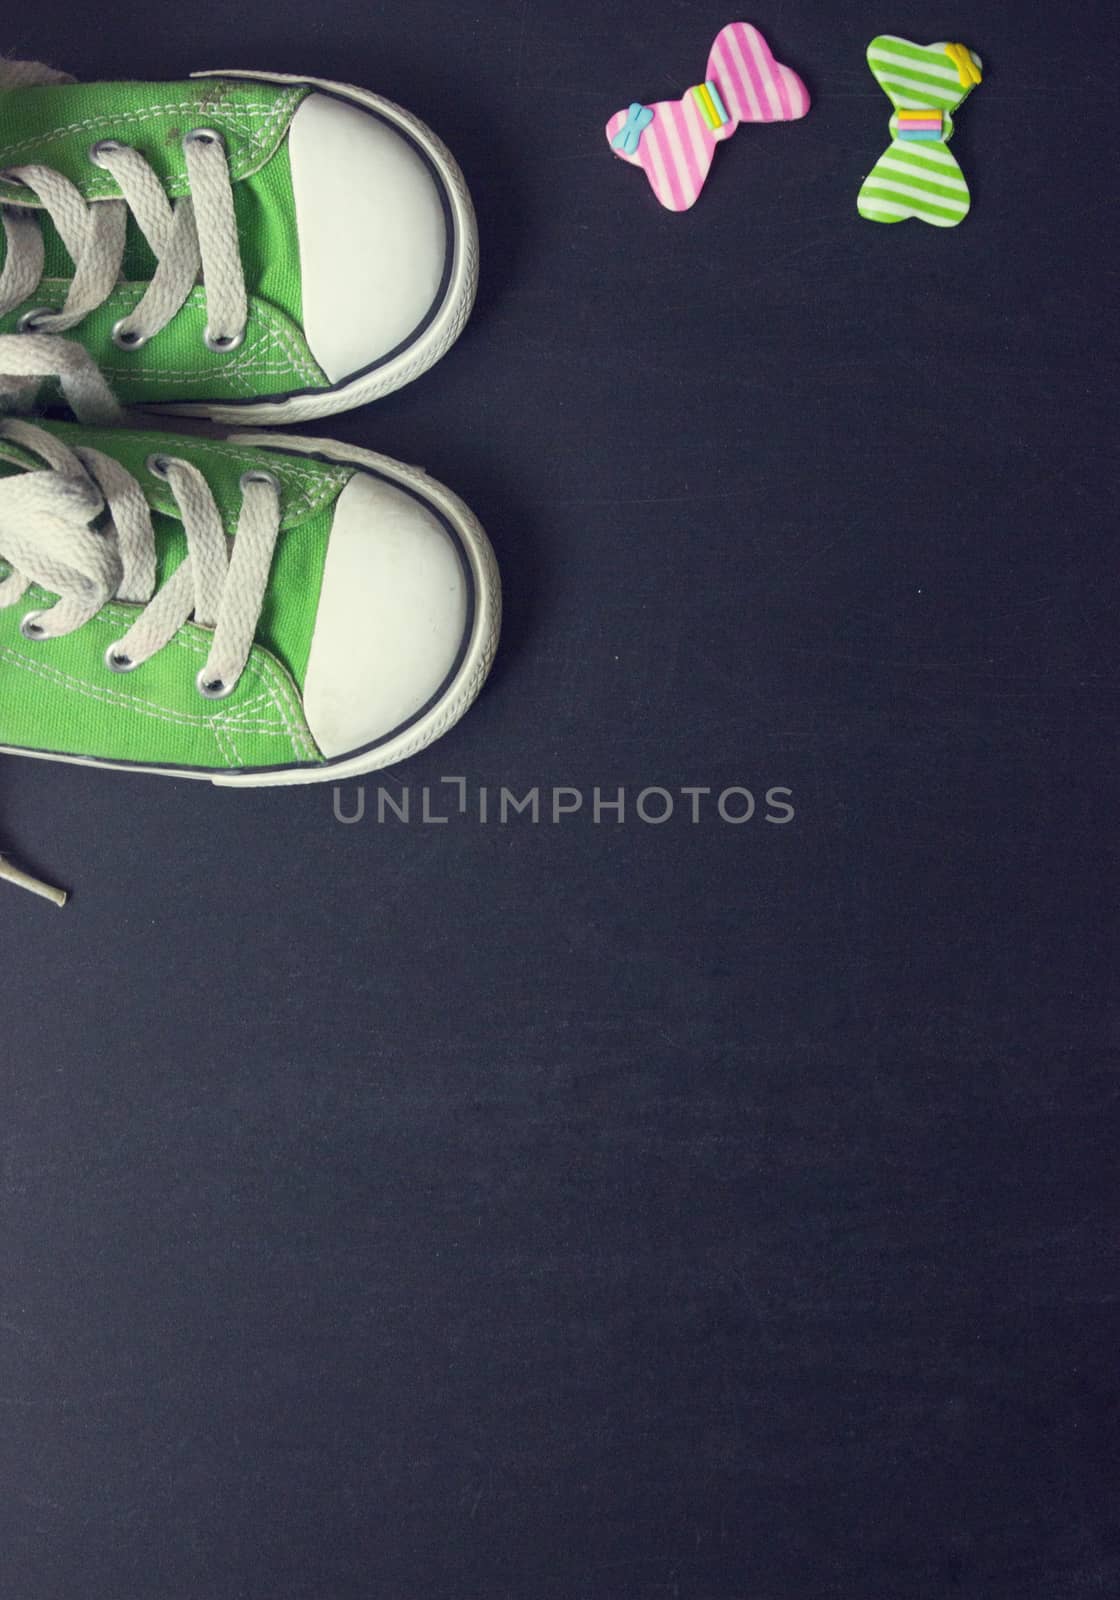 Top view of green sneakers on black board, with copy space